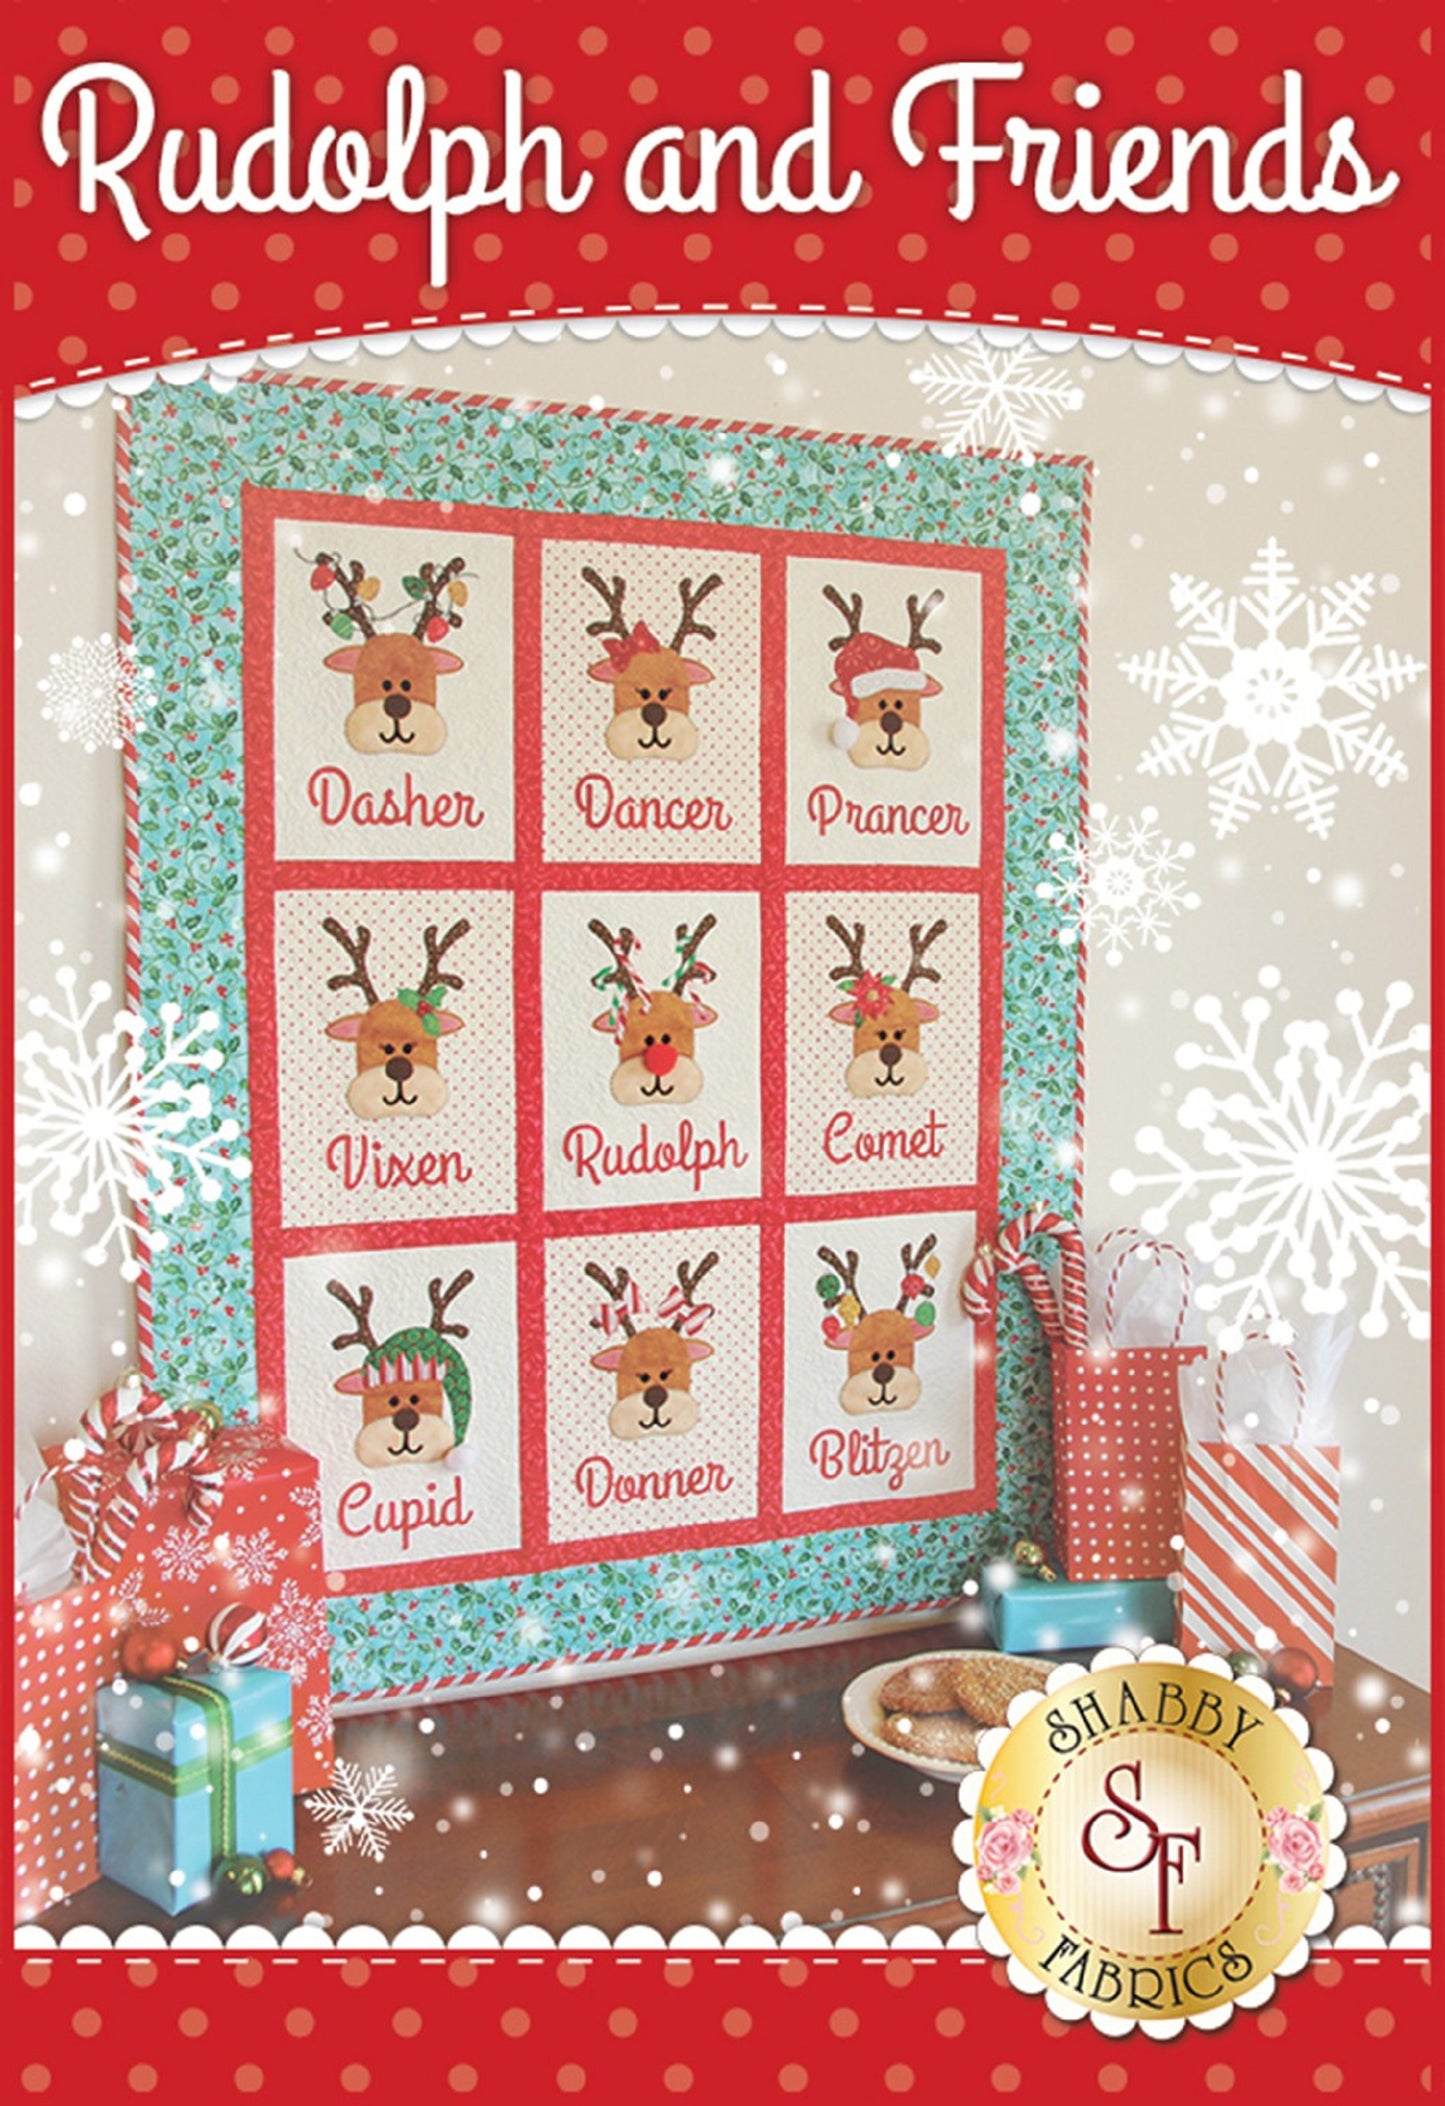 Rudolf and Friends Quilt Pattern by Shabby Fabrics